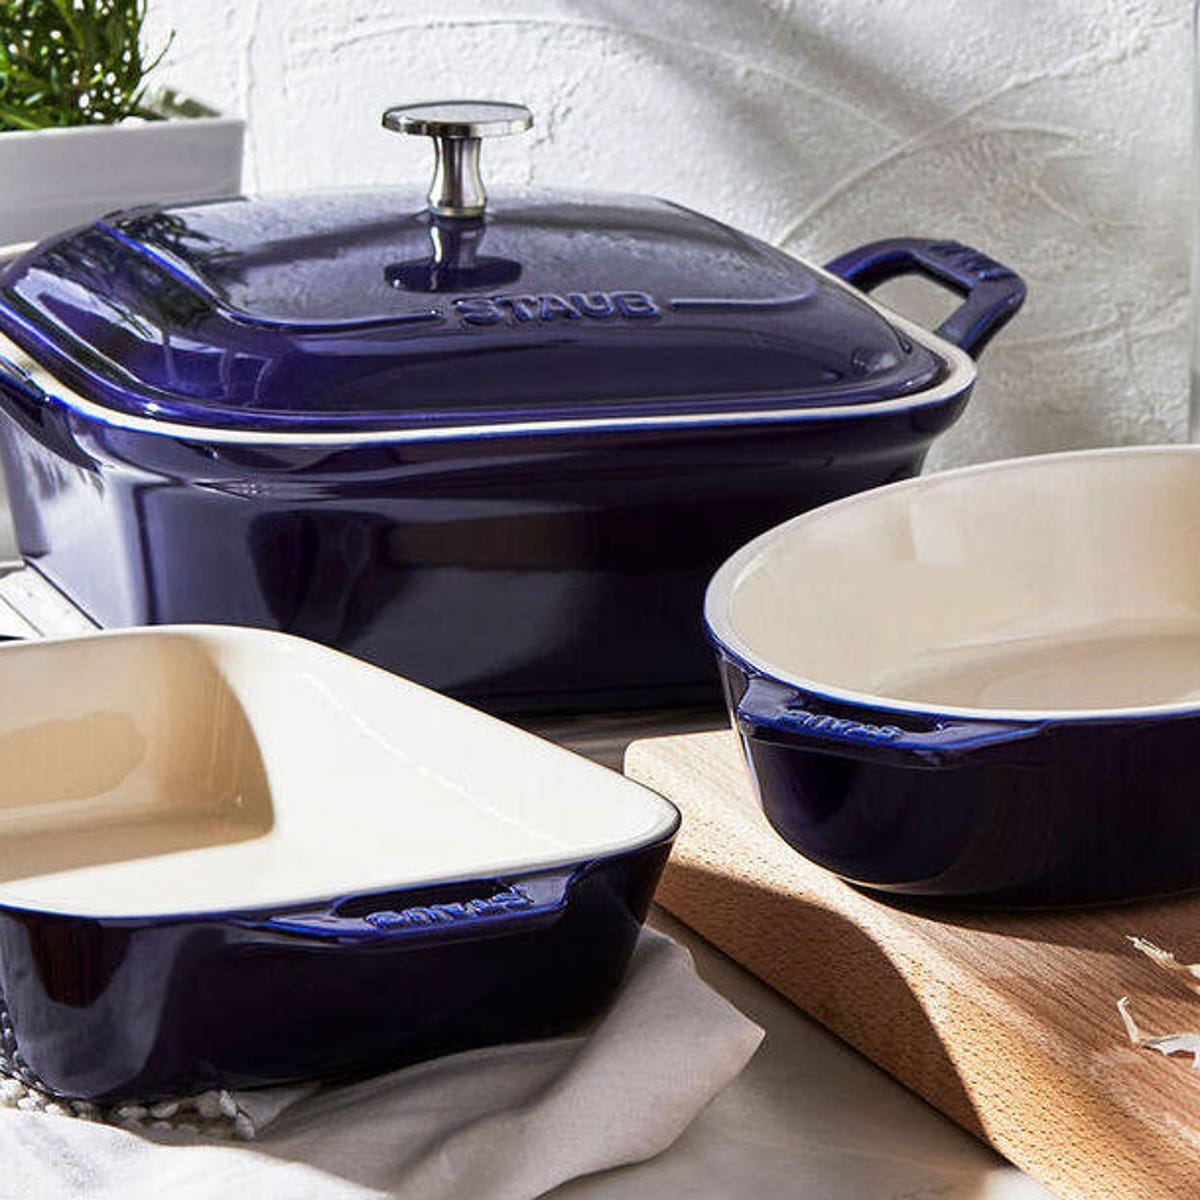 A 4-piece Staub bakeware set you'll have for years to come is under $100 -  CNET